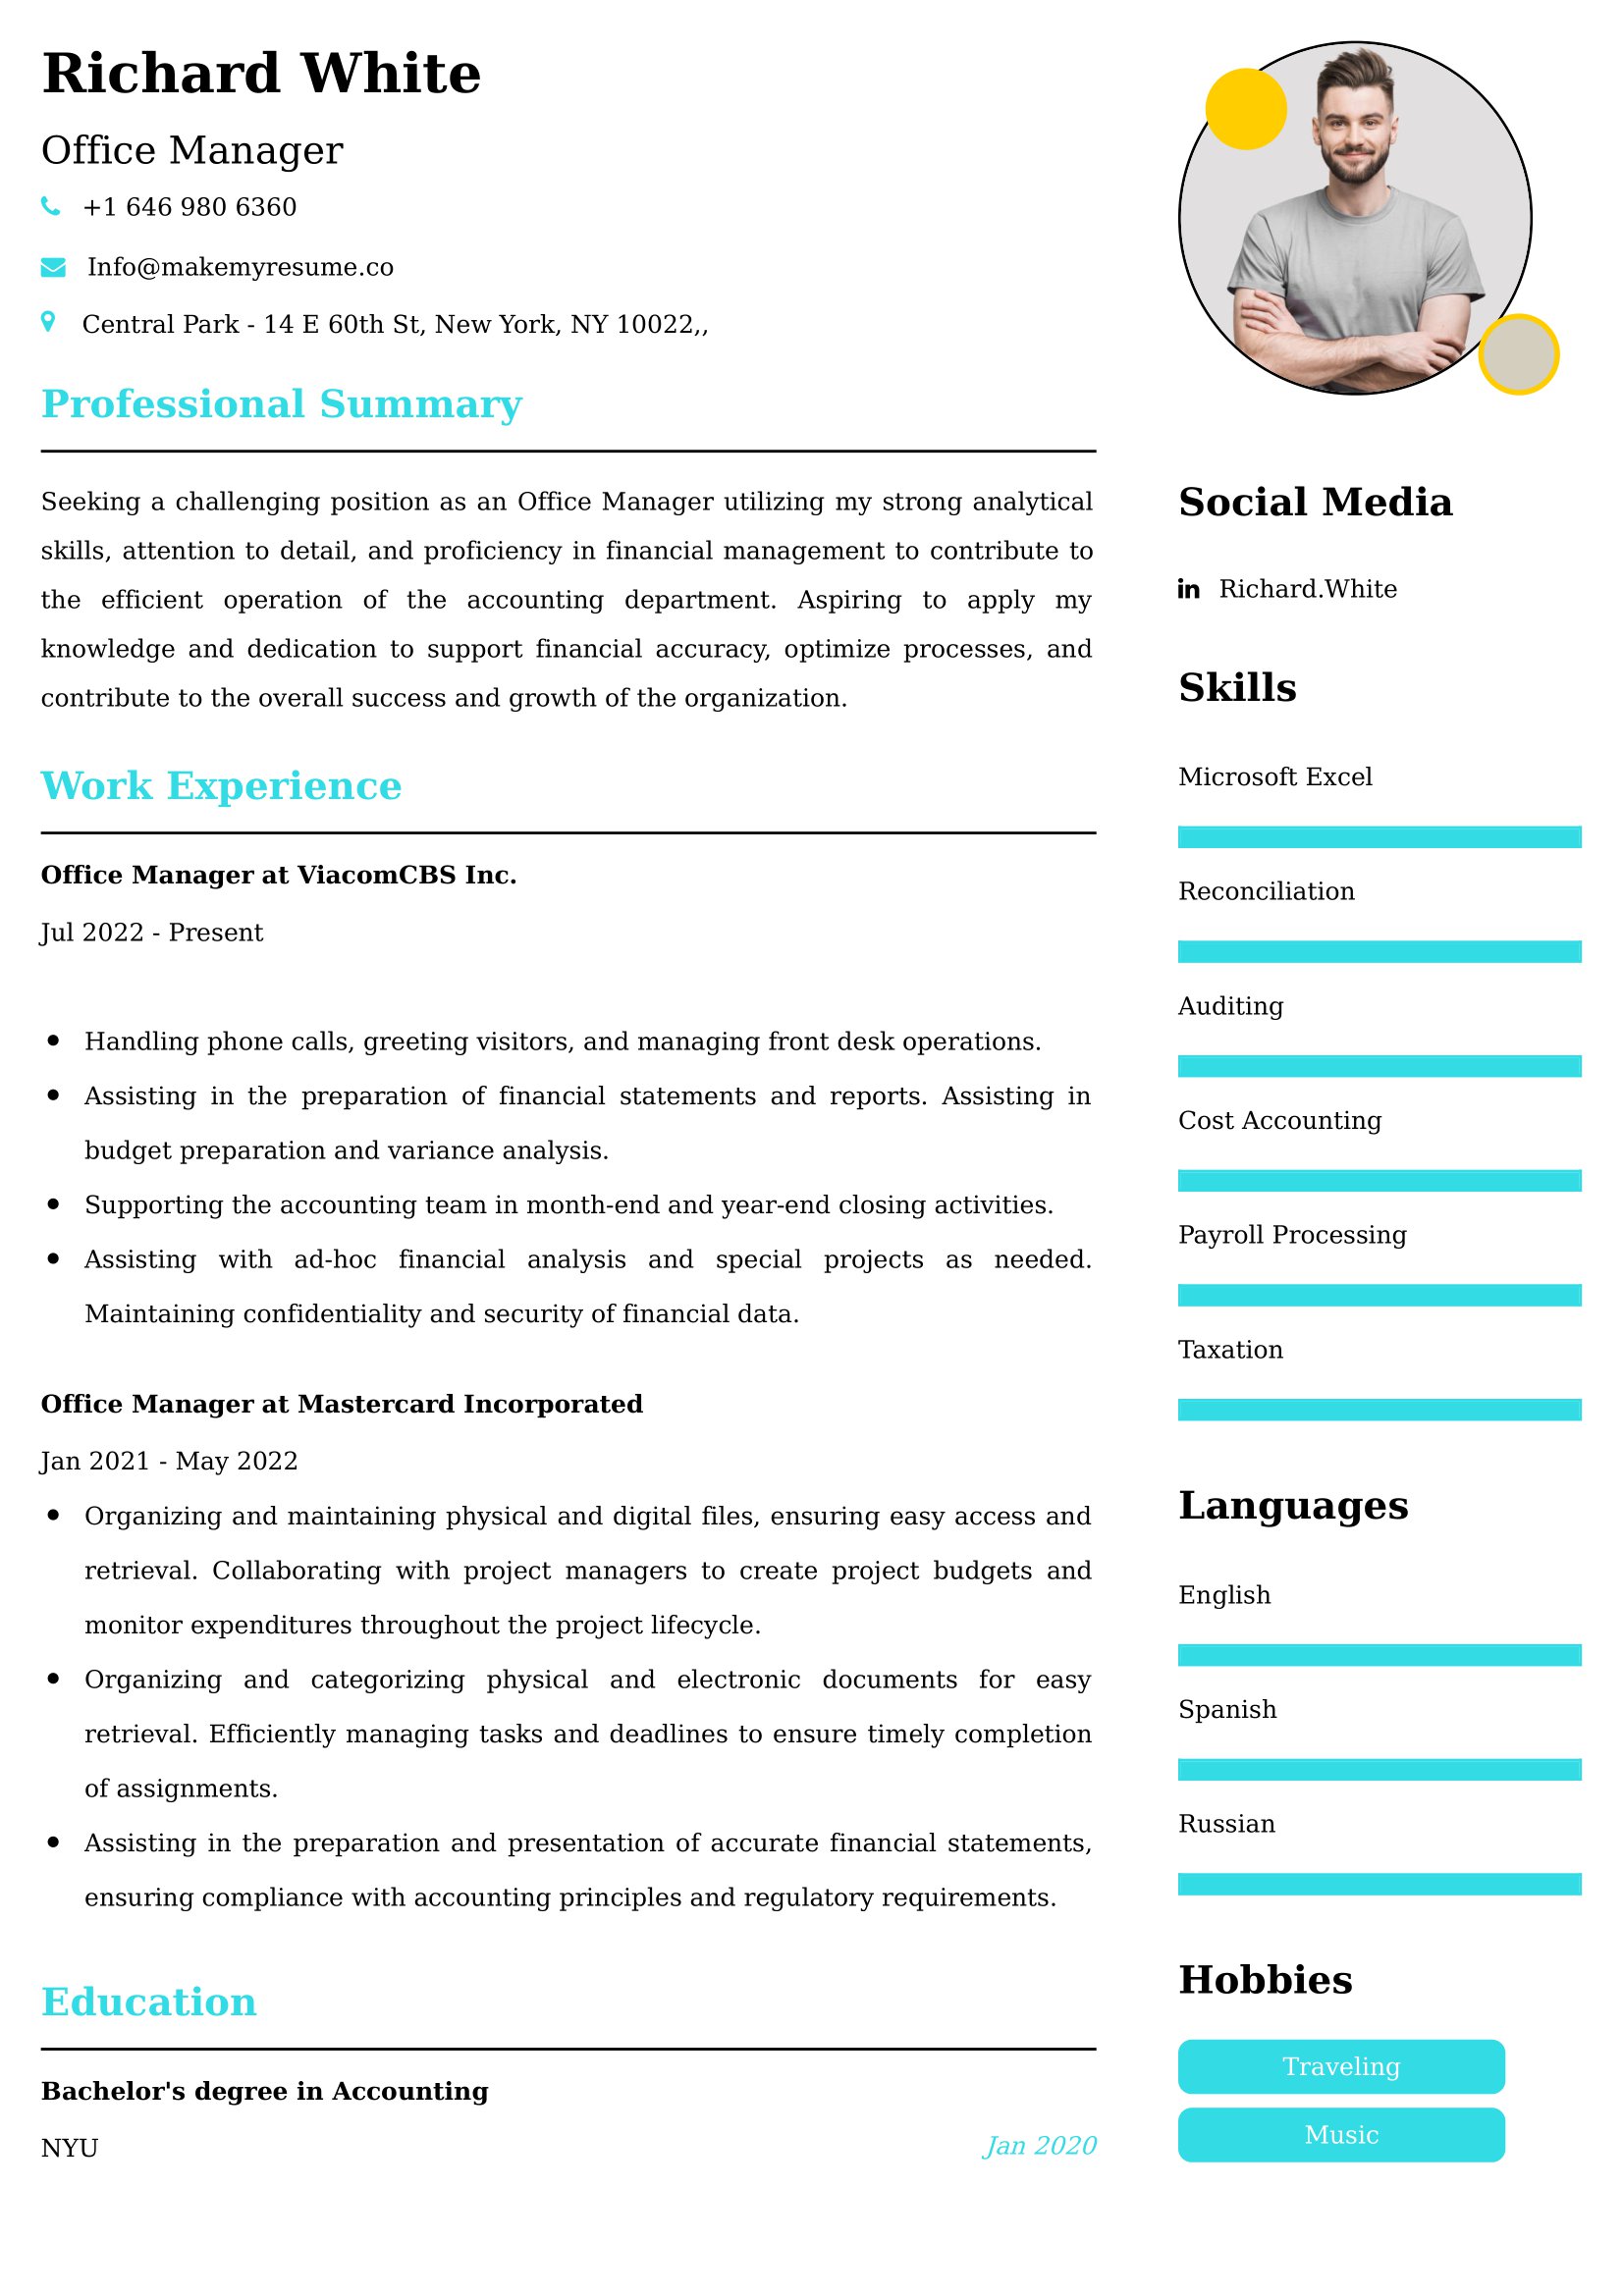 Administrative Assistant Manager Resume Examples - Australian Format and Tips